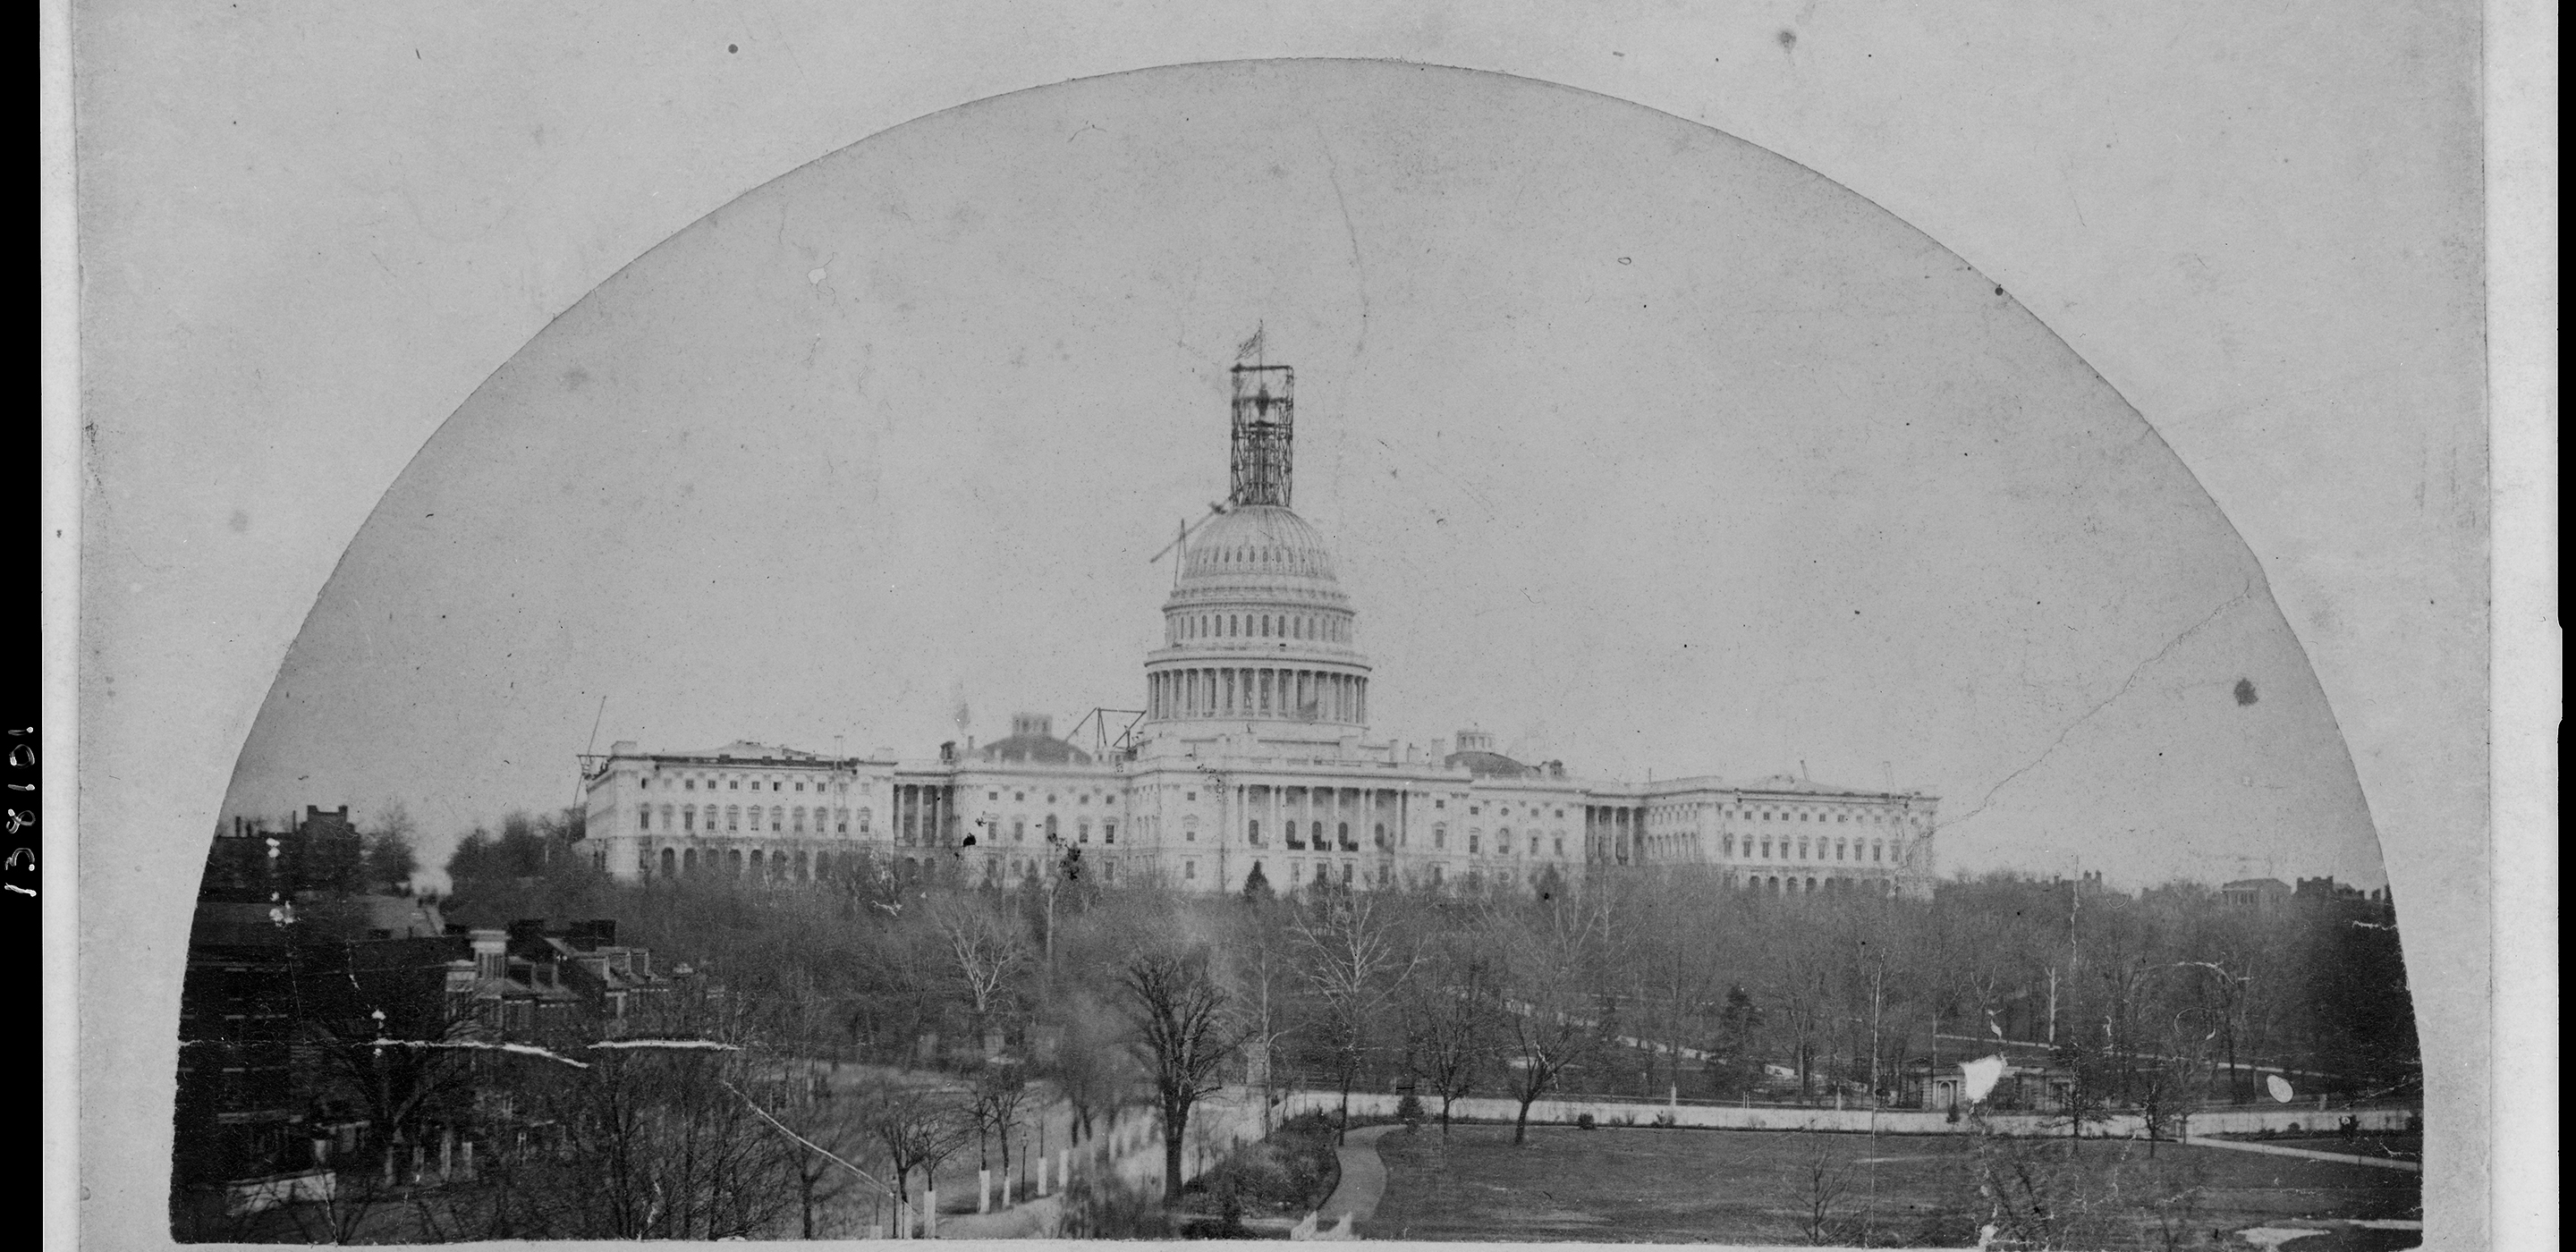 Photograph showing Capitol building with scaffolding surrounding Thomas Crawford's Statue of Freedom atop the dome.